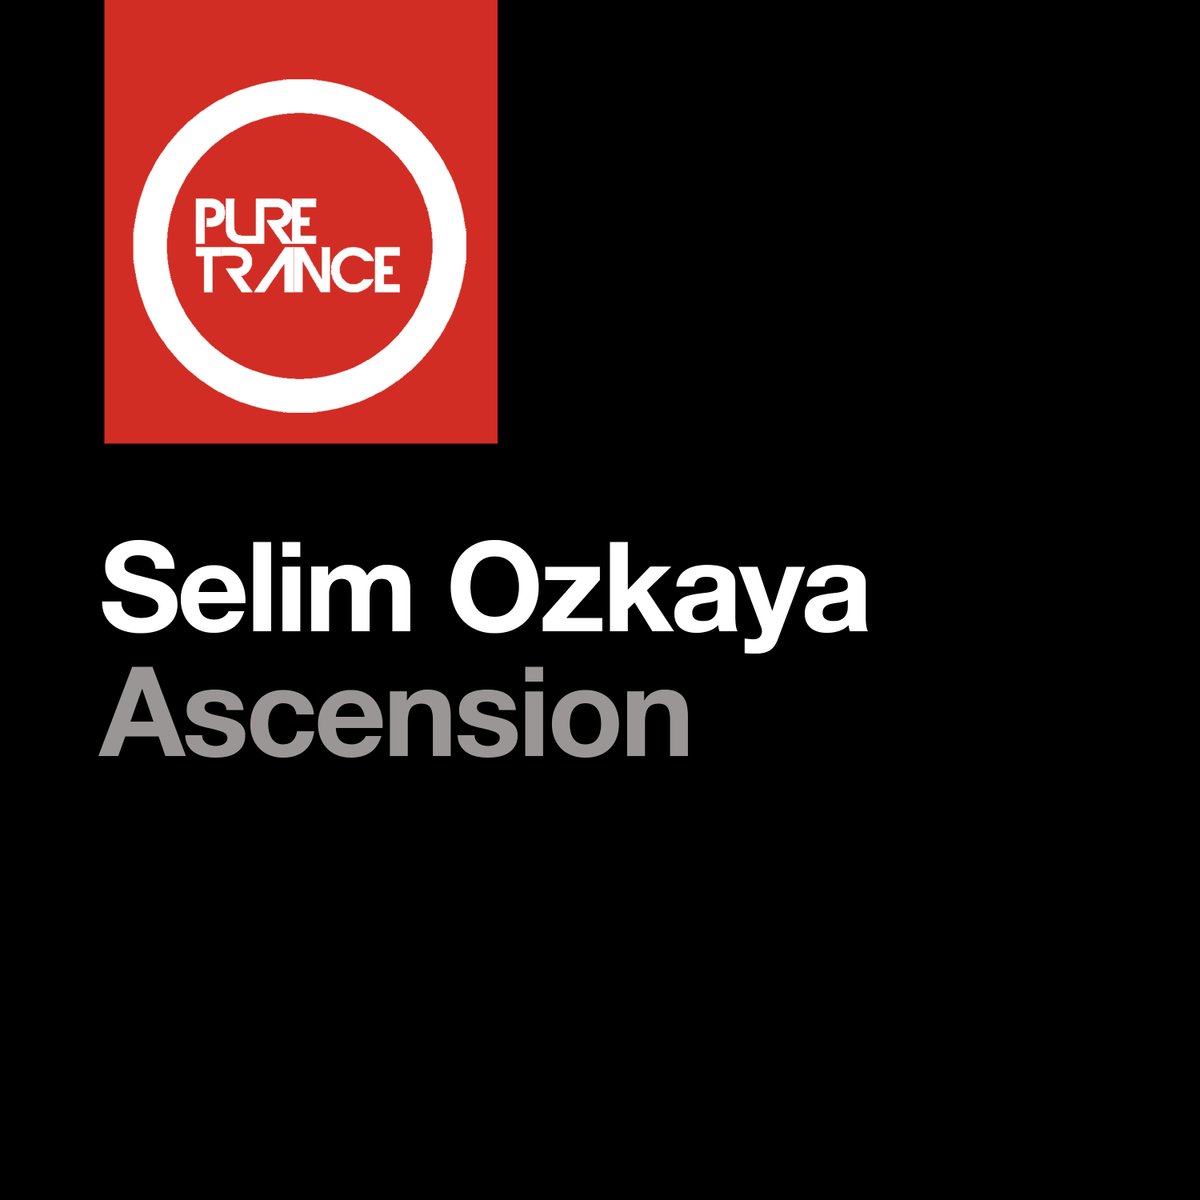 An ID in Solarstone’s sets for over 12 months but finally out this Friday.. Big Tune: 11. Selim Ozkaya - Ascension [Pure Trance] pure.complete.me/ascension